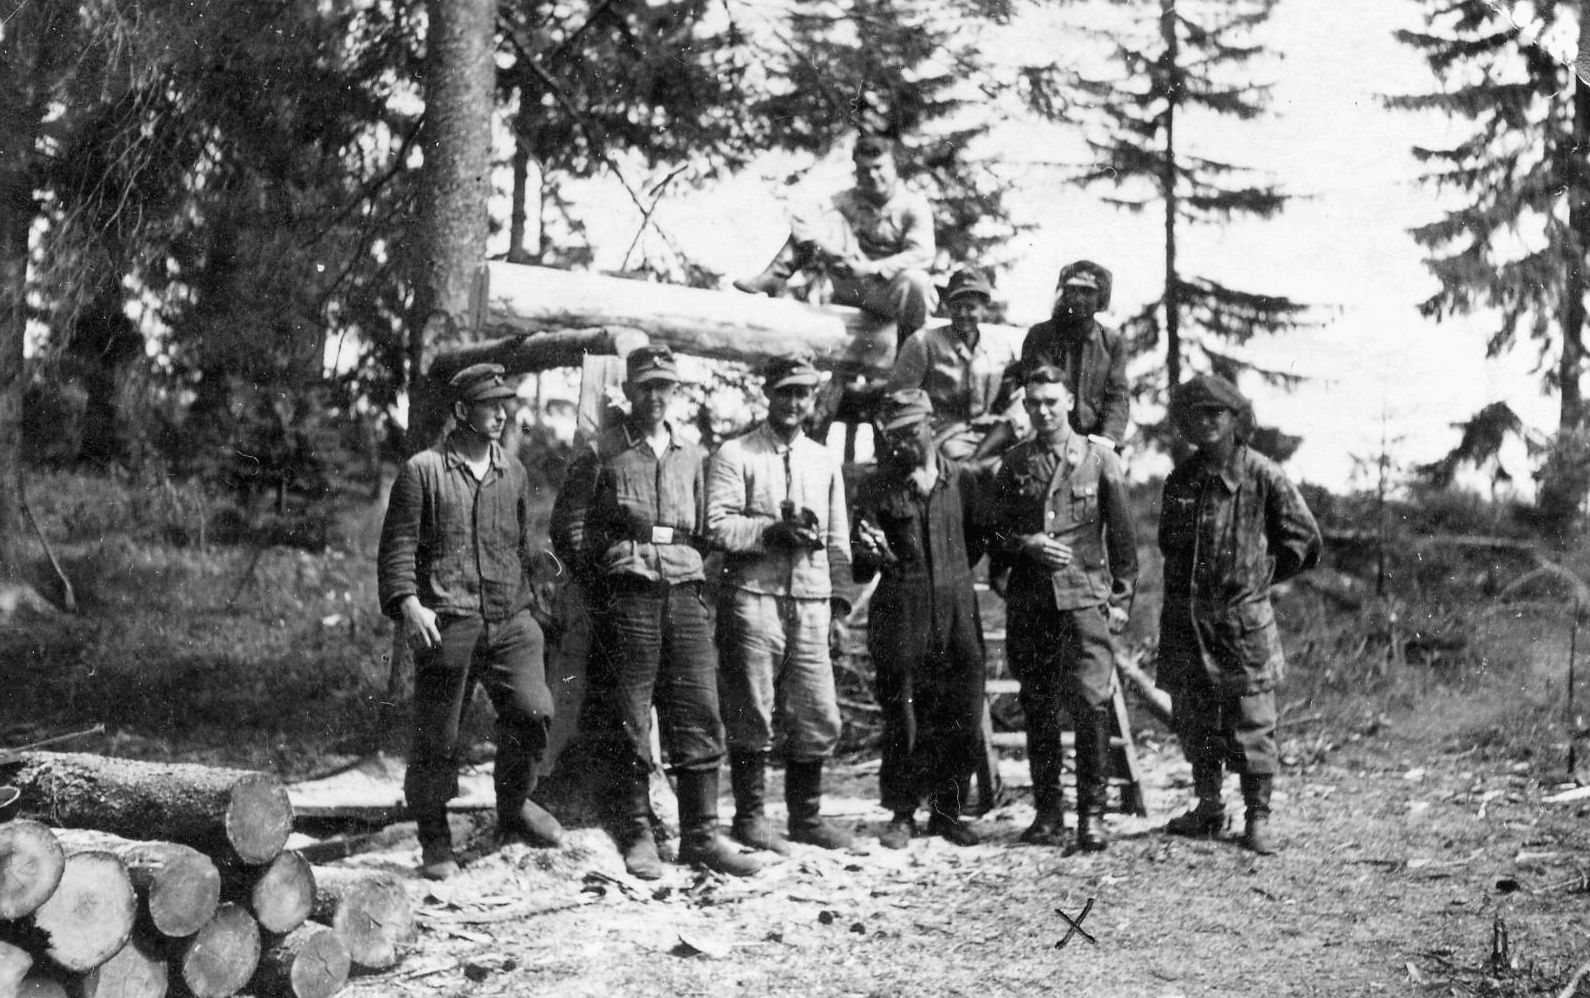 Benz says, “The 5th Battery Calculation Section, located in the woods, with our CO 1st Lieutenant Sauer standing second from the right. I am sitting behind him and to the right. The man fourth from the left, wearing dark blue coveralls, is a truck driver. The NCO third from the left is holding a raven that he captured, tamed, and taught to speak.”